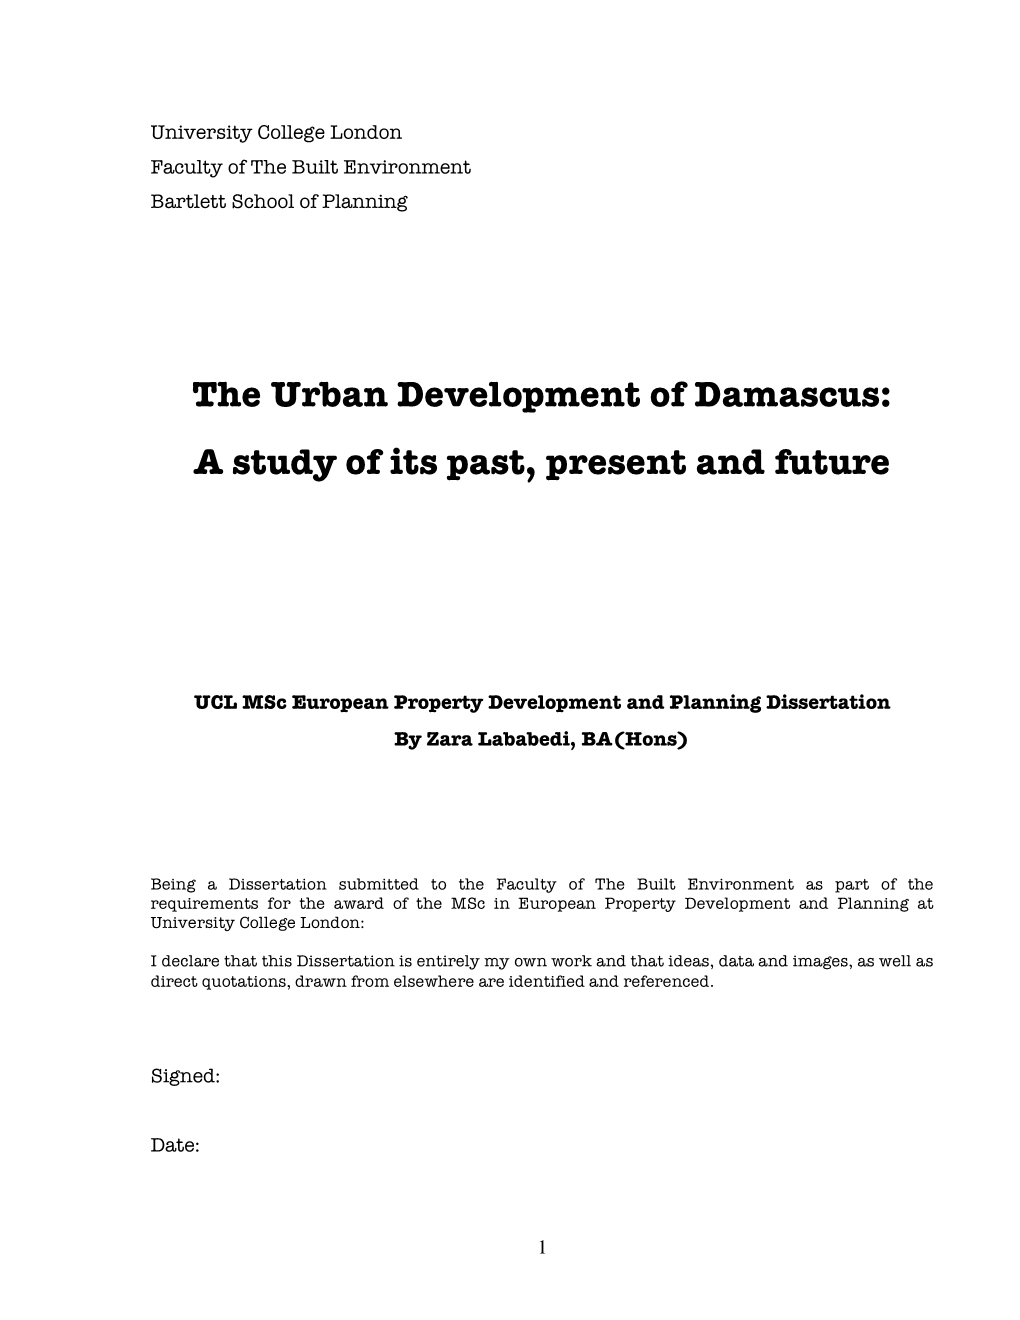 The Urban Development of Damascus: a Study of Its Past, Present and Future